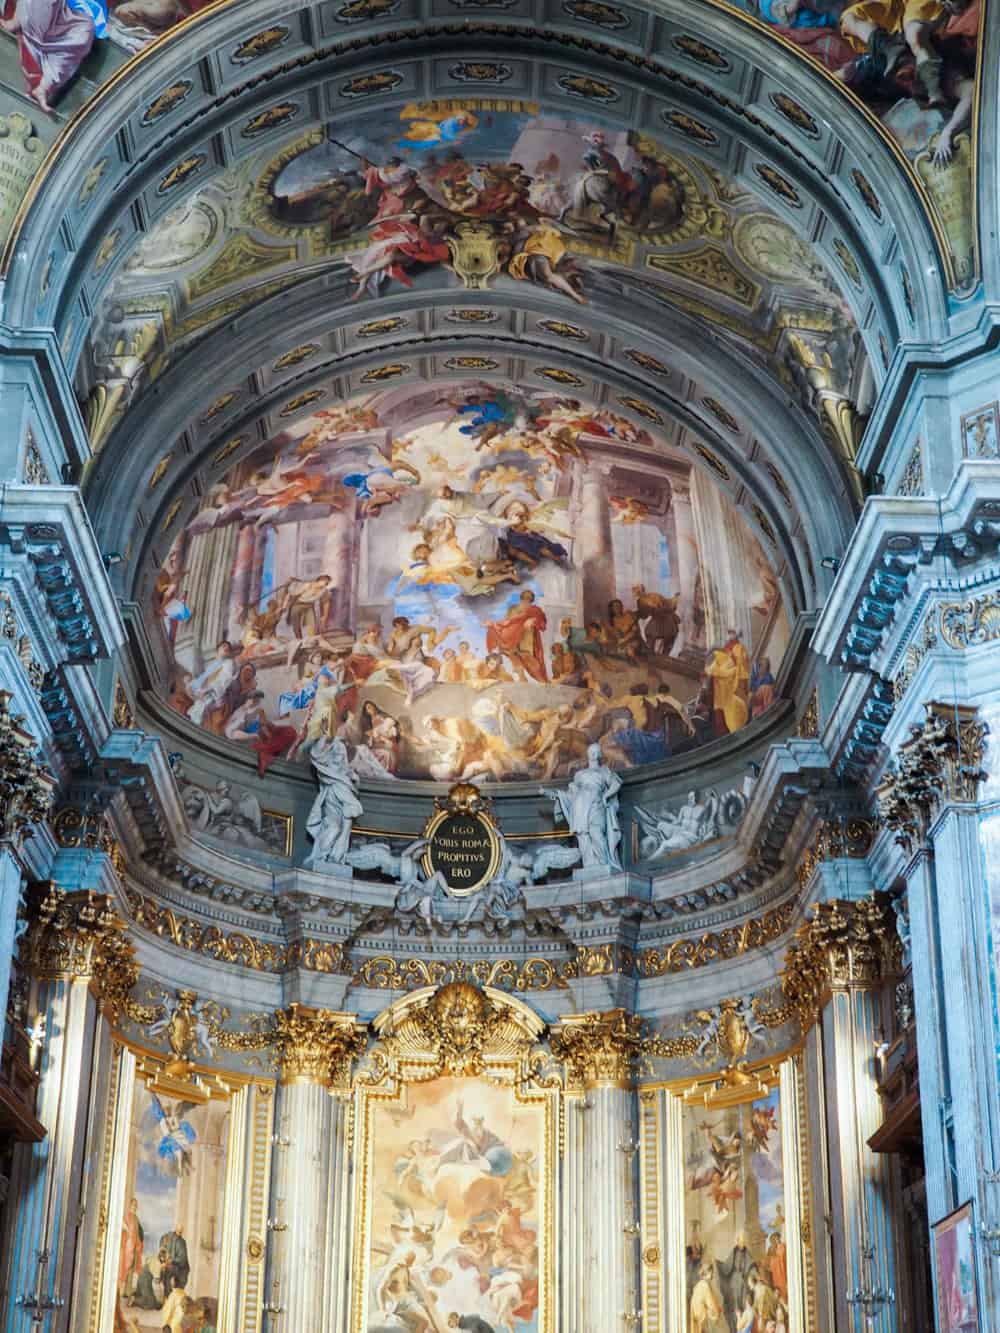 The Church of St. Ignatius of Loyola at Campus Martius in Rome, Italy is a baroque church that had its groundbreaking in 1626 and was completed in 1650.  | via Autumn All Along